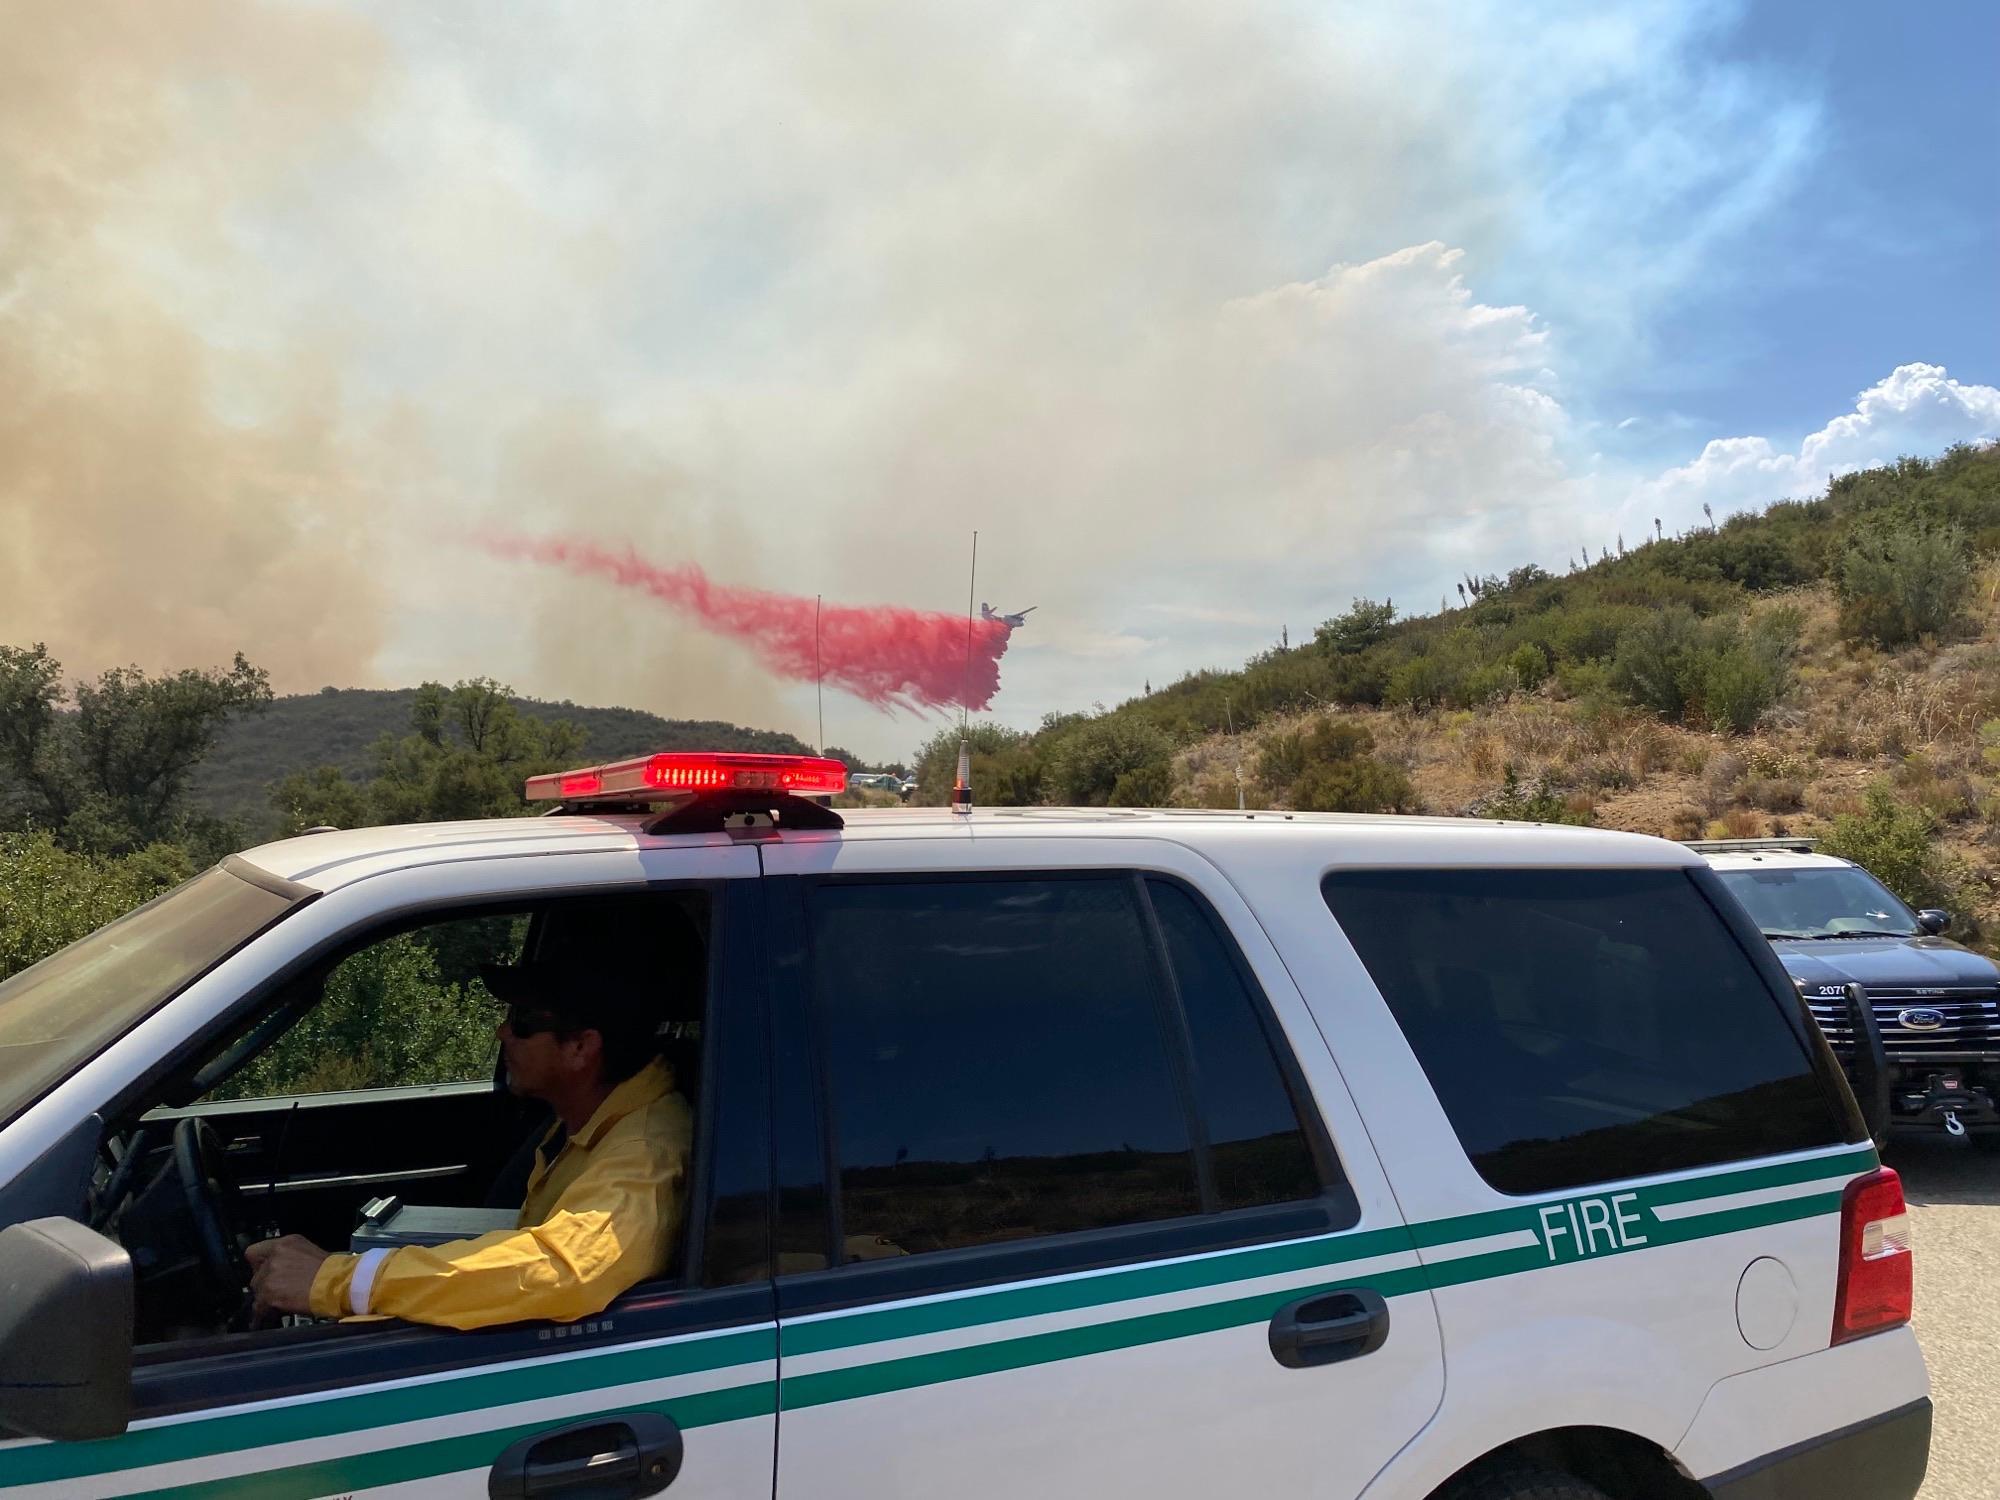 Airtanker dropping fire retardant on a hillside with a forest service fire chief's vehicle in the foreground